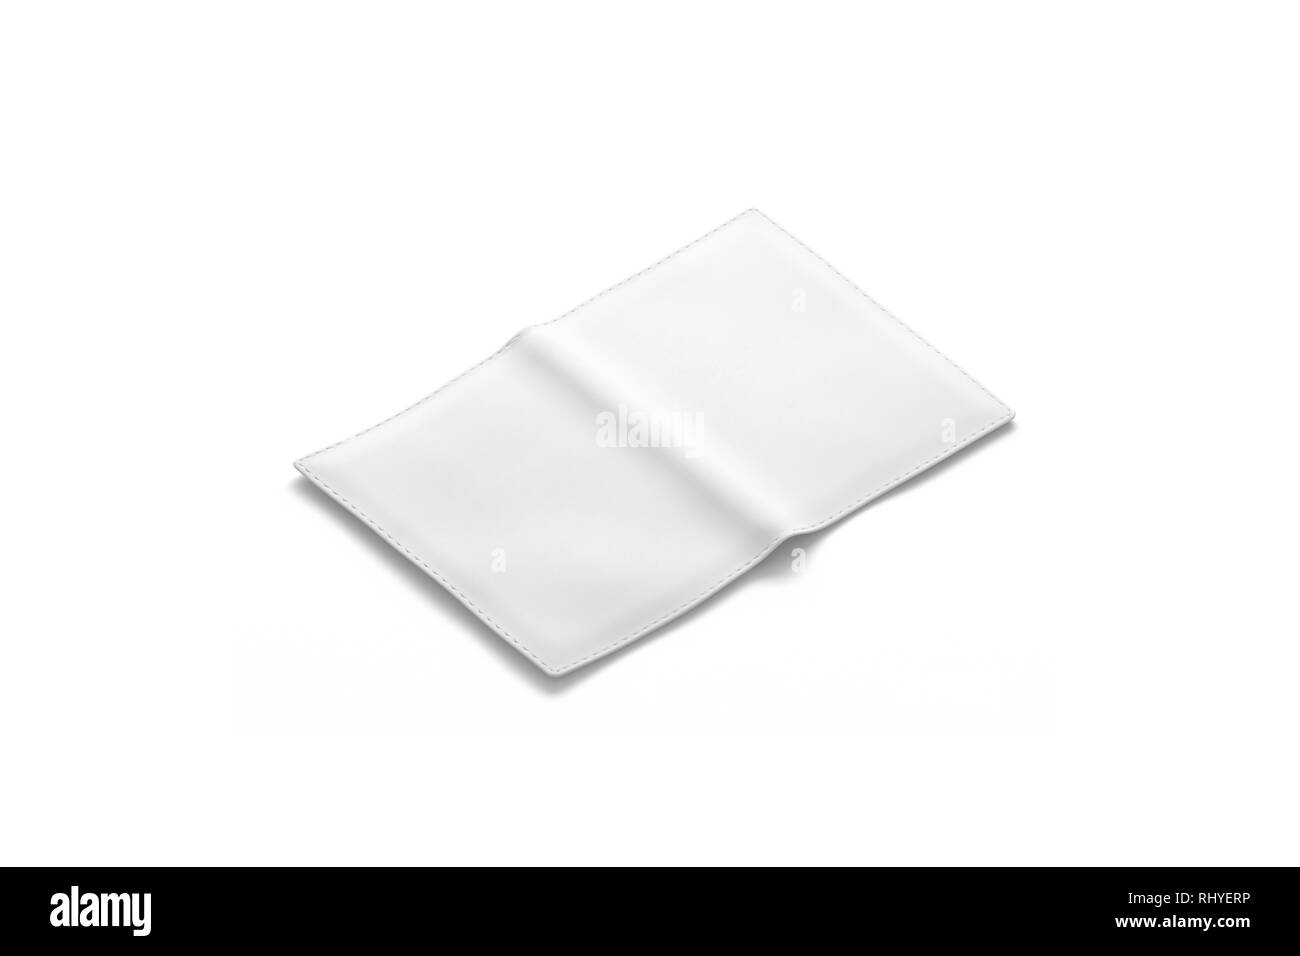 Blank white passport cover mockup, back side view, isolated, 3d rendering. Empty leather covering mock up. Clear opened pass for legal tourism. Citizen case or pocketbook template. Stock Photo